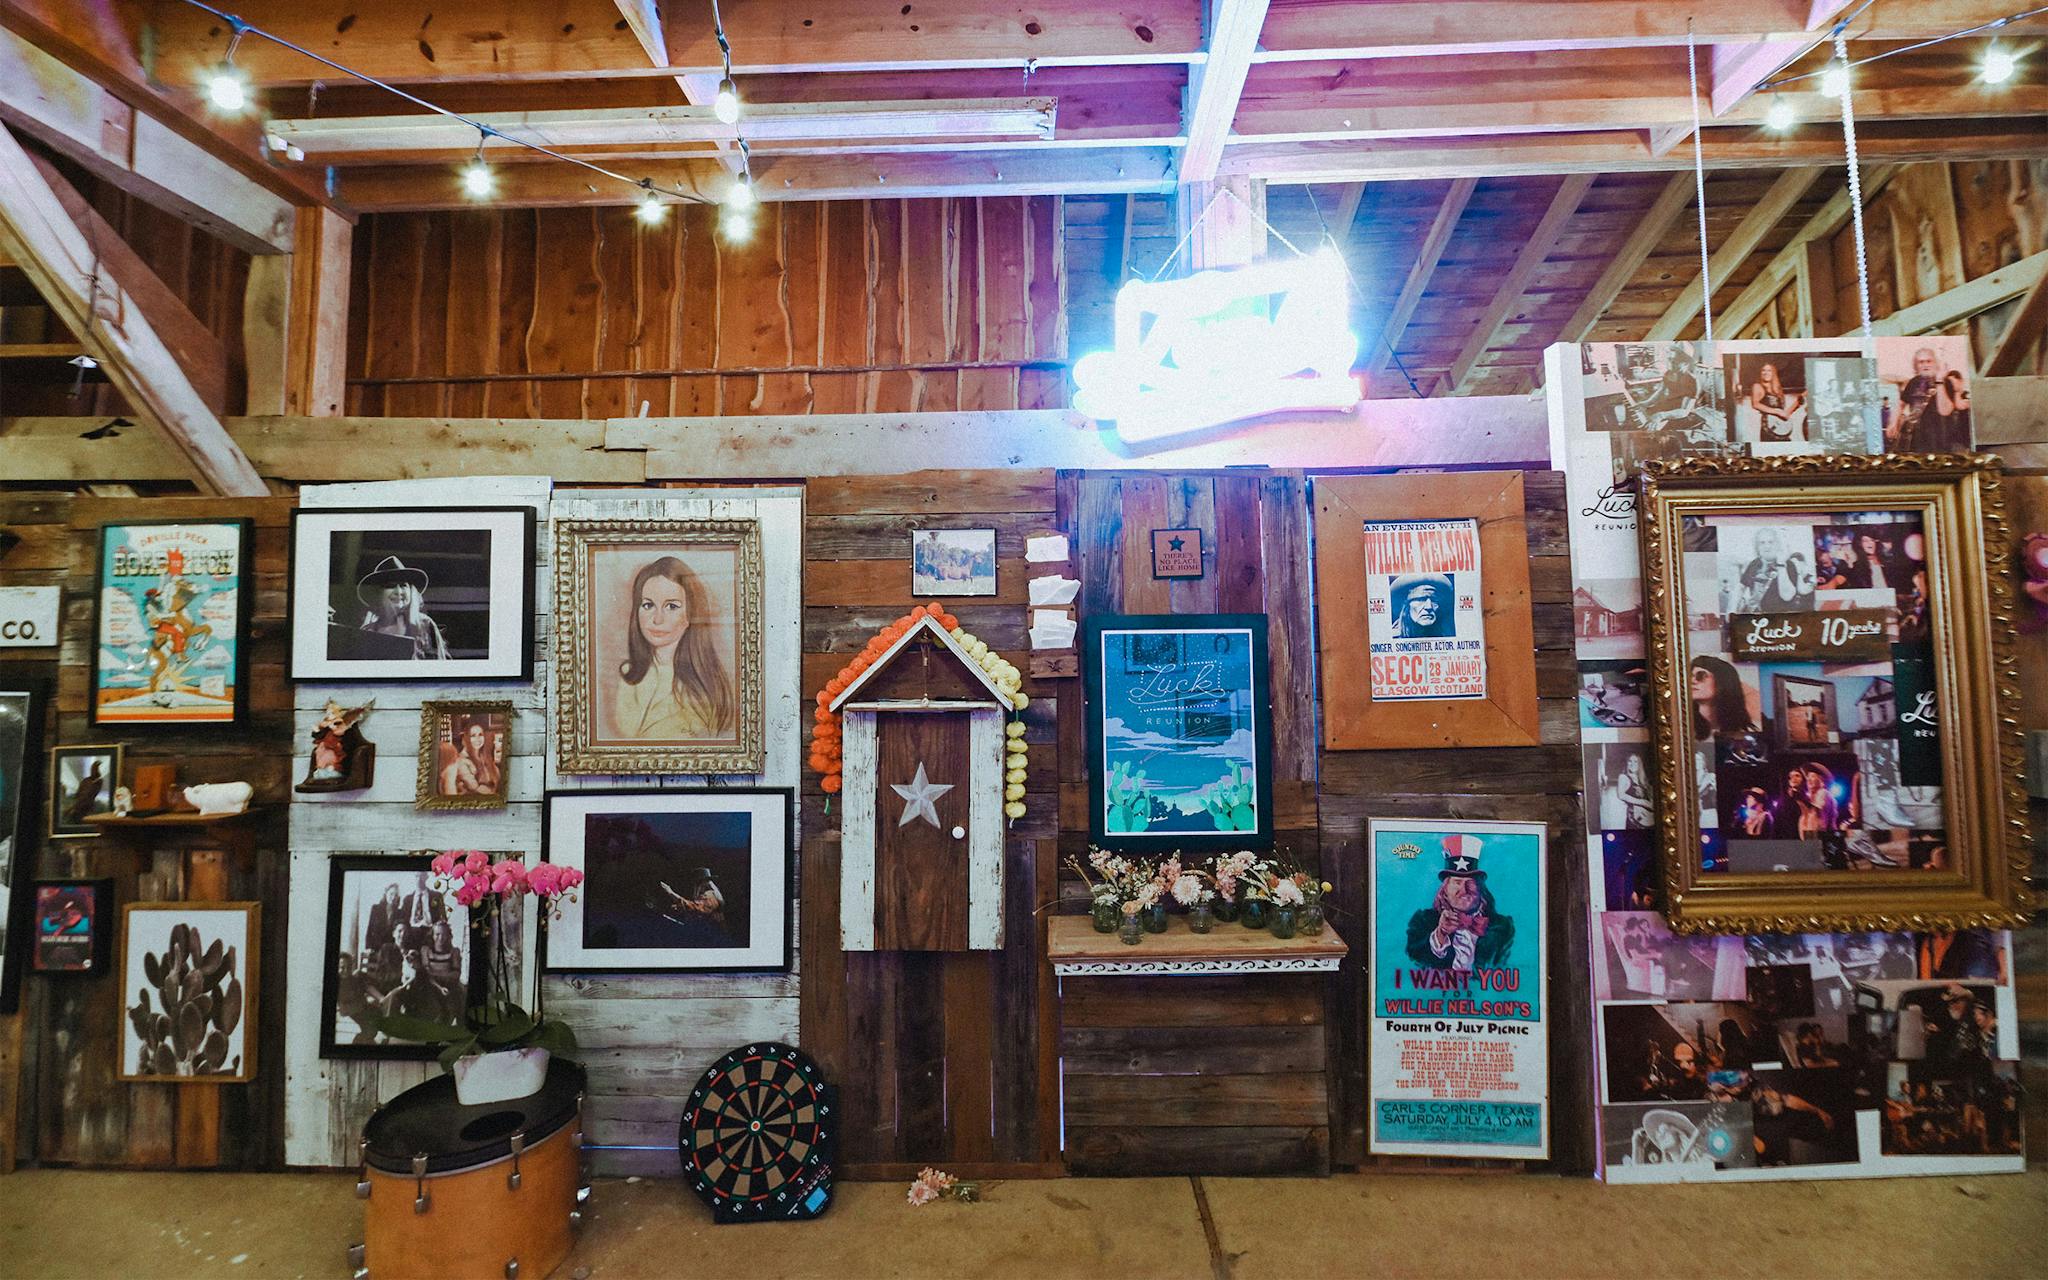 Tributes to Nelson’s late sister Bobbie were placed throughout the festival. In the barn were a touching collection of photographs and a mailbox stuffed with letters from fans.